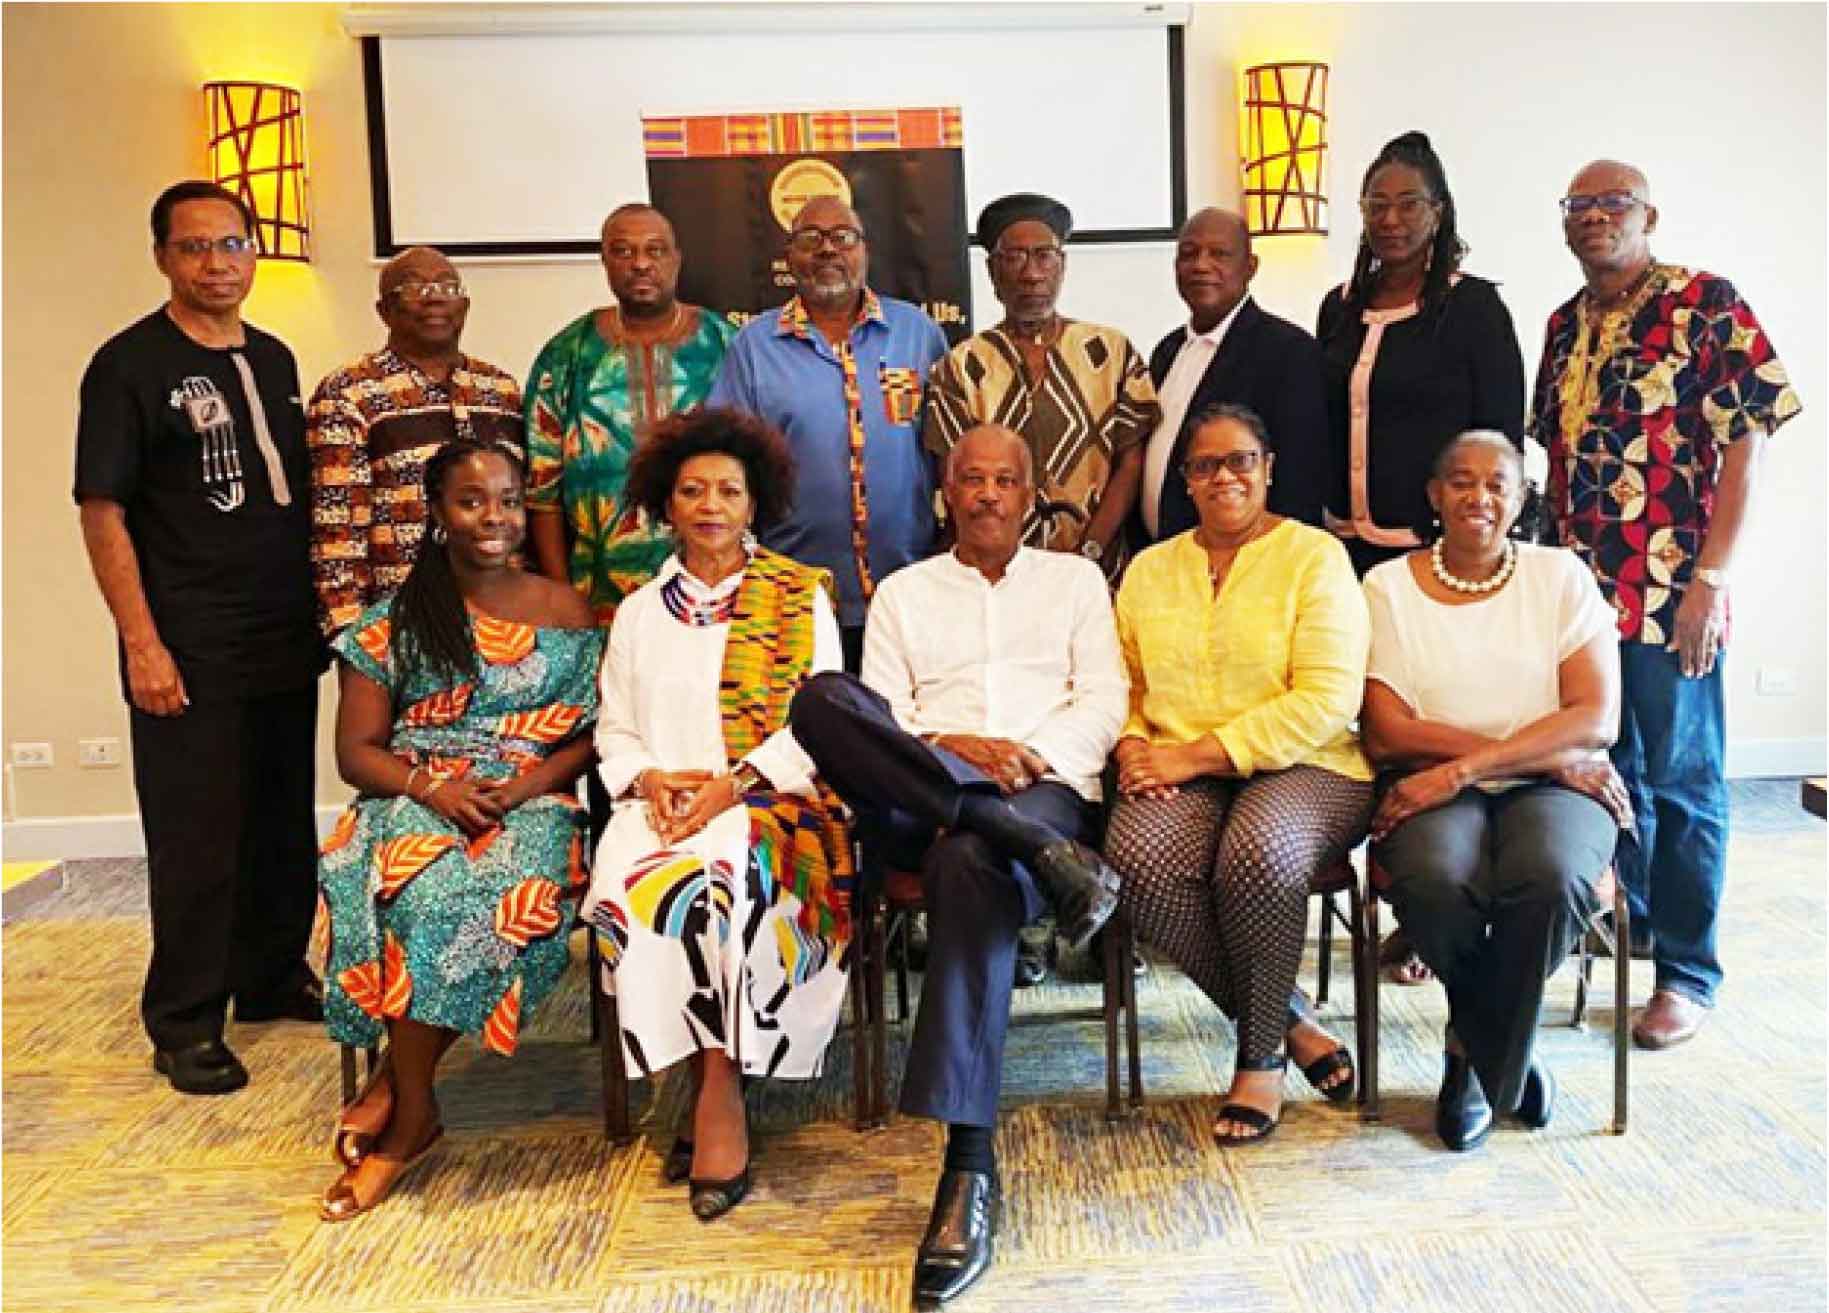 Members of the CARICOM Reparations Commission (CRC) at their March 28-29, 2022 Meeting in Barbados. (PHOTO COURTESY: CARICOM Secretariat Communications Unit)